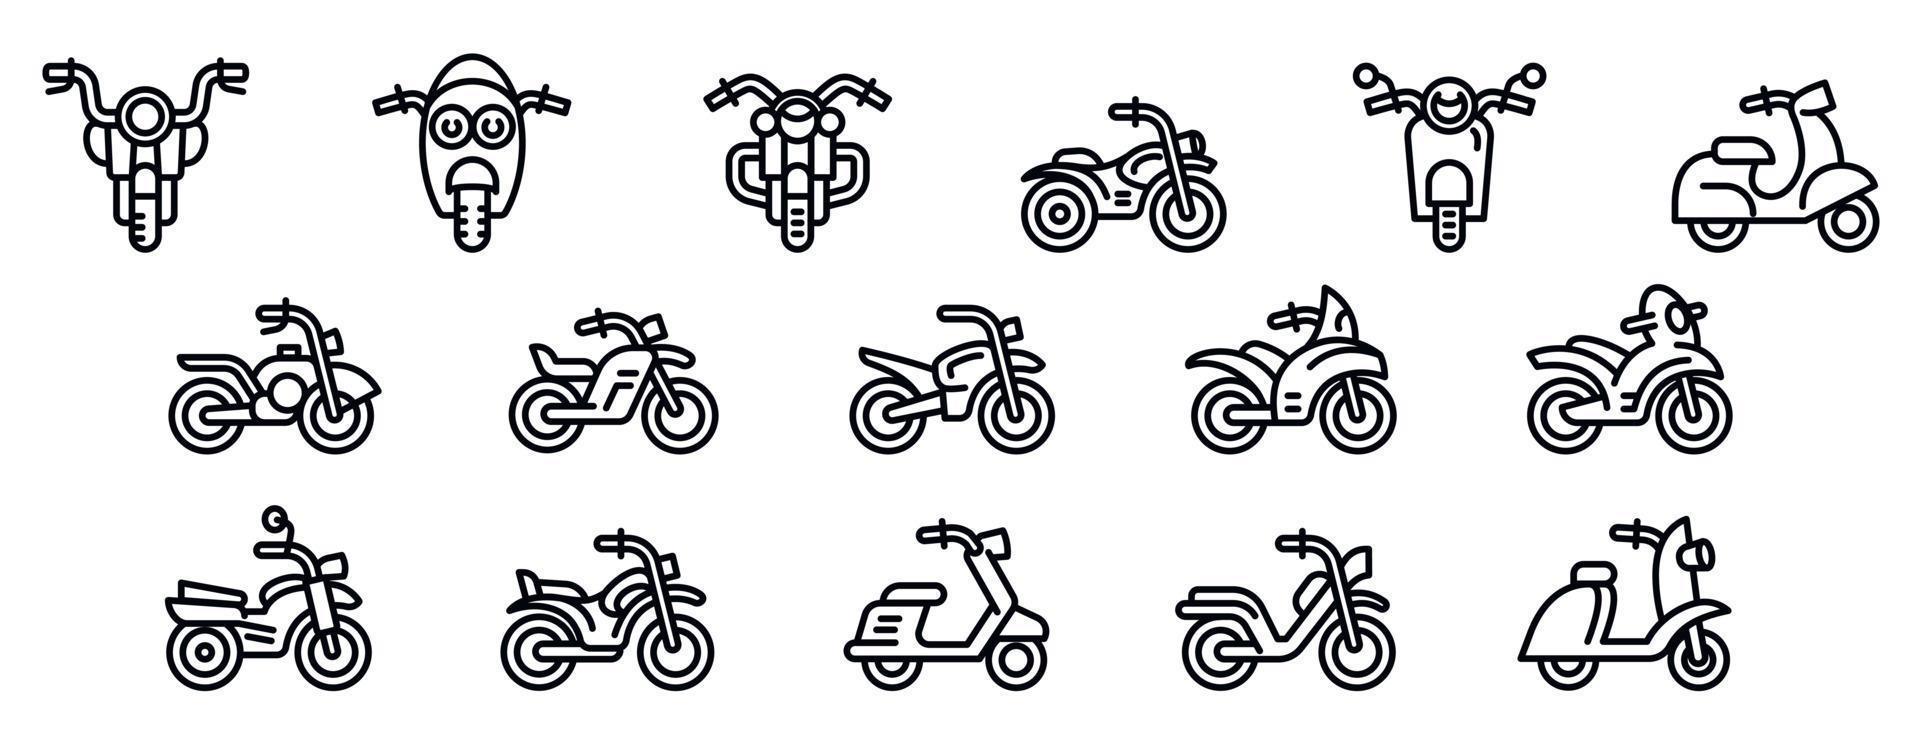 Motorbike icons set, outline style vector